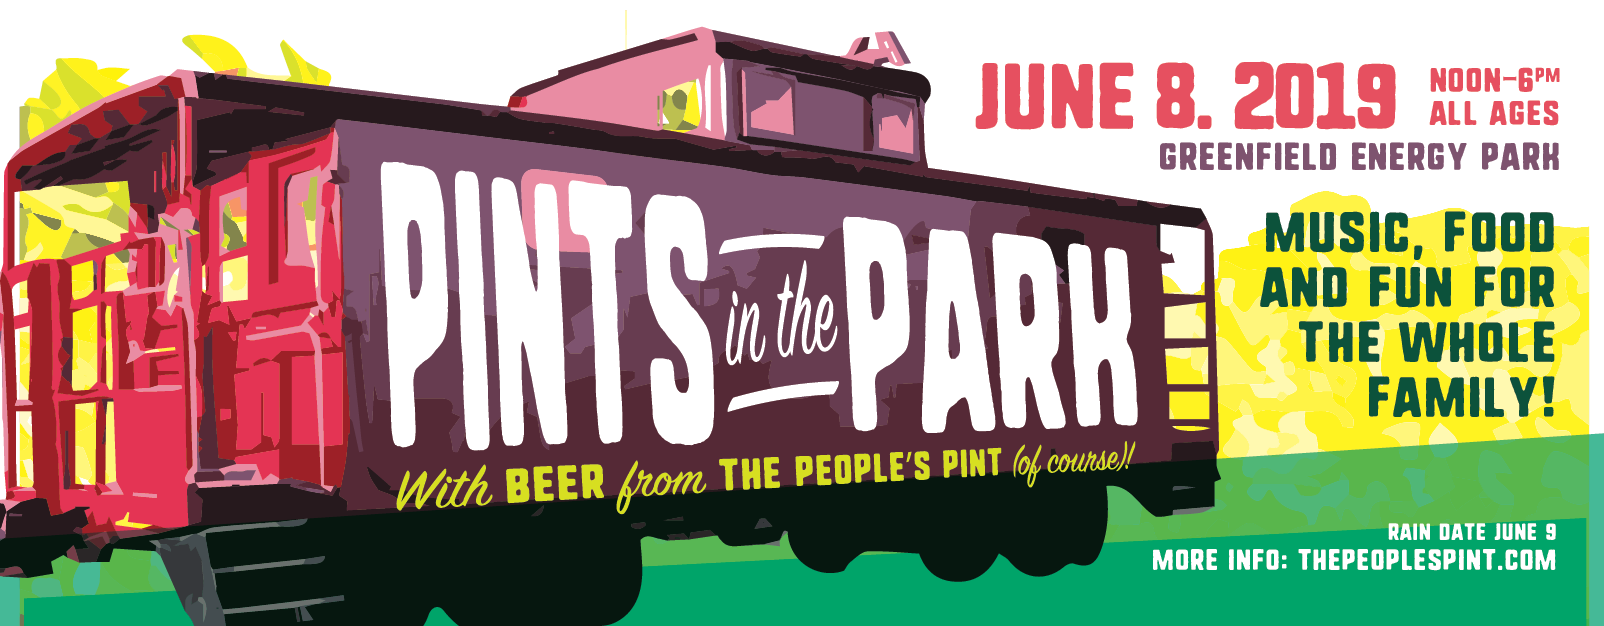 Pints in the Park banner image